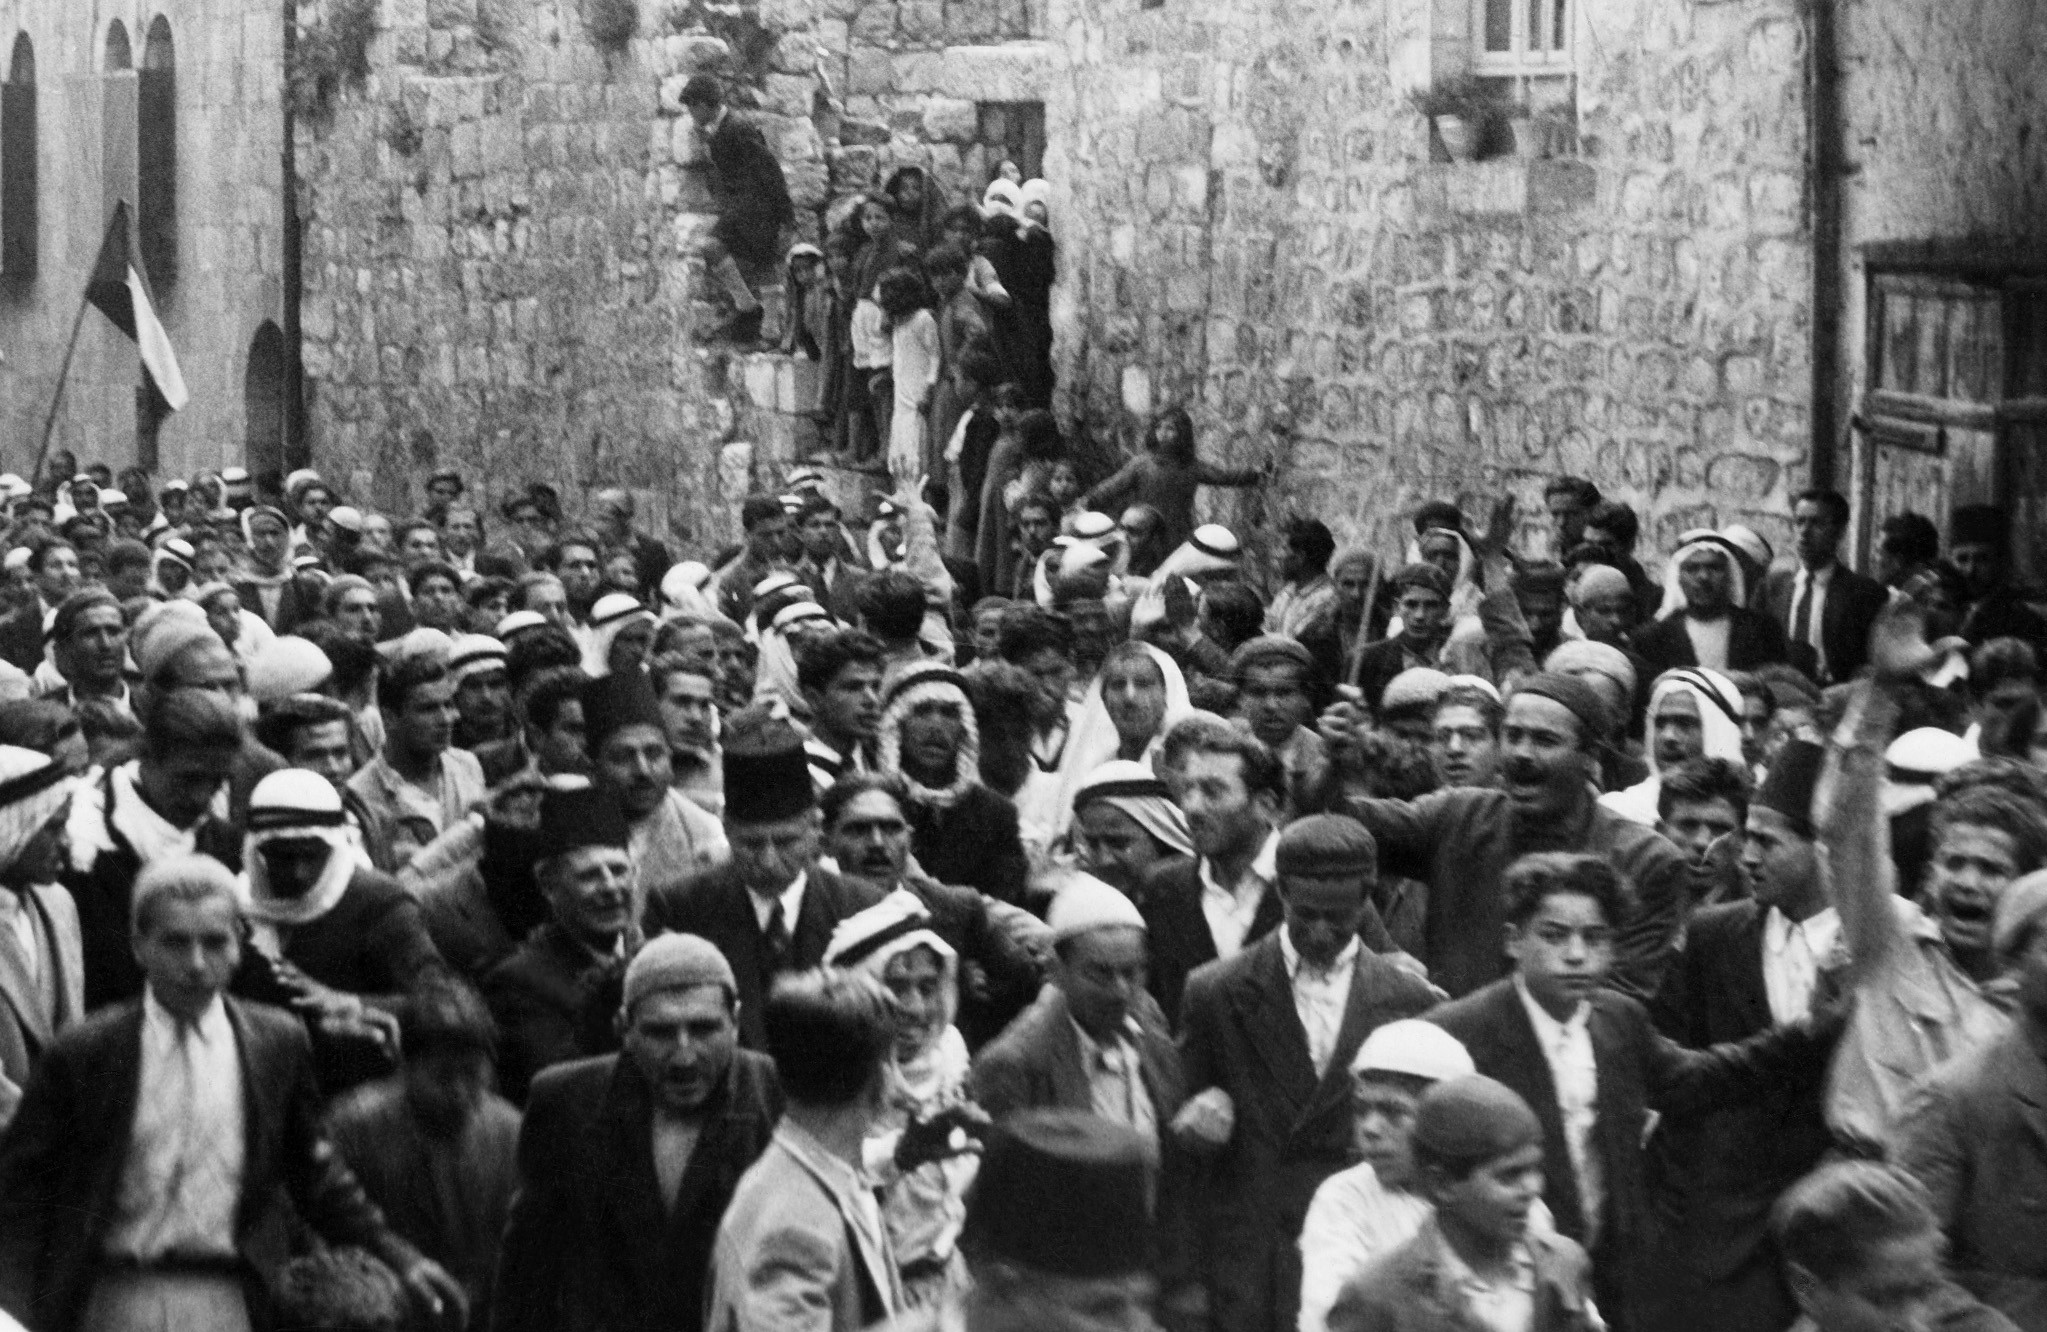 A picture dated before 1937 during the British Mandate in Palestine shows Arabs demonstrating in the Old City of Jerusalem against the Jewish immigration to Palestine.